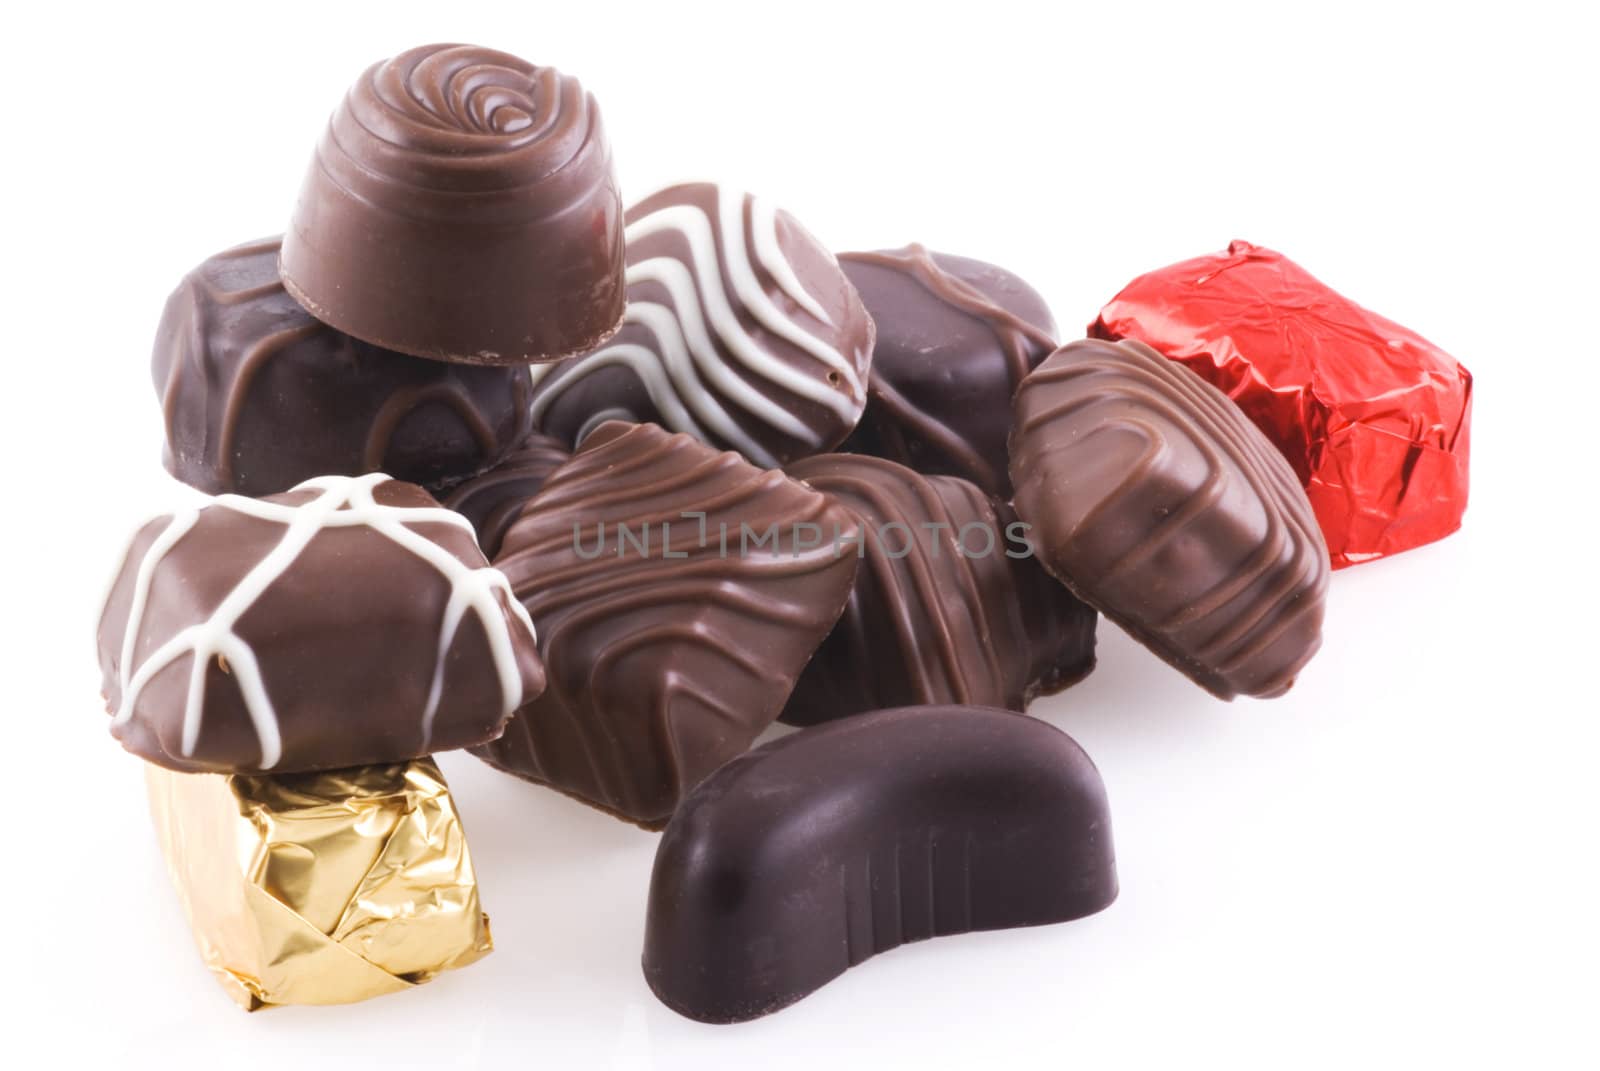 Bunch of belgian chocolates isolated on a white background.